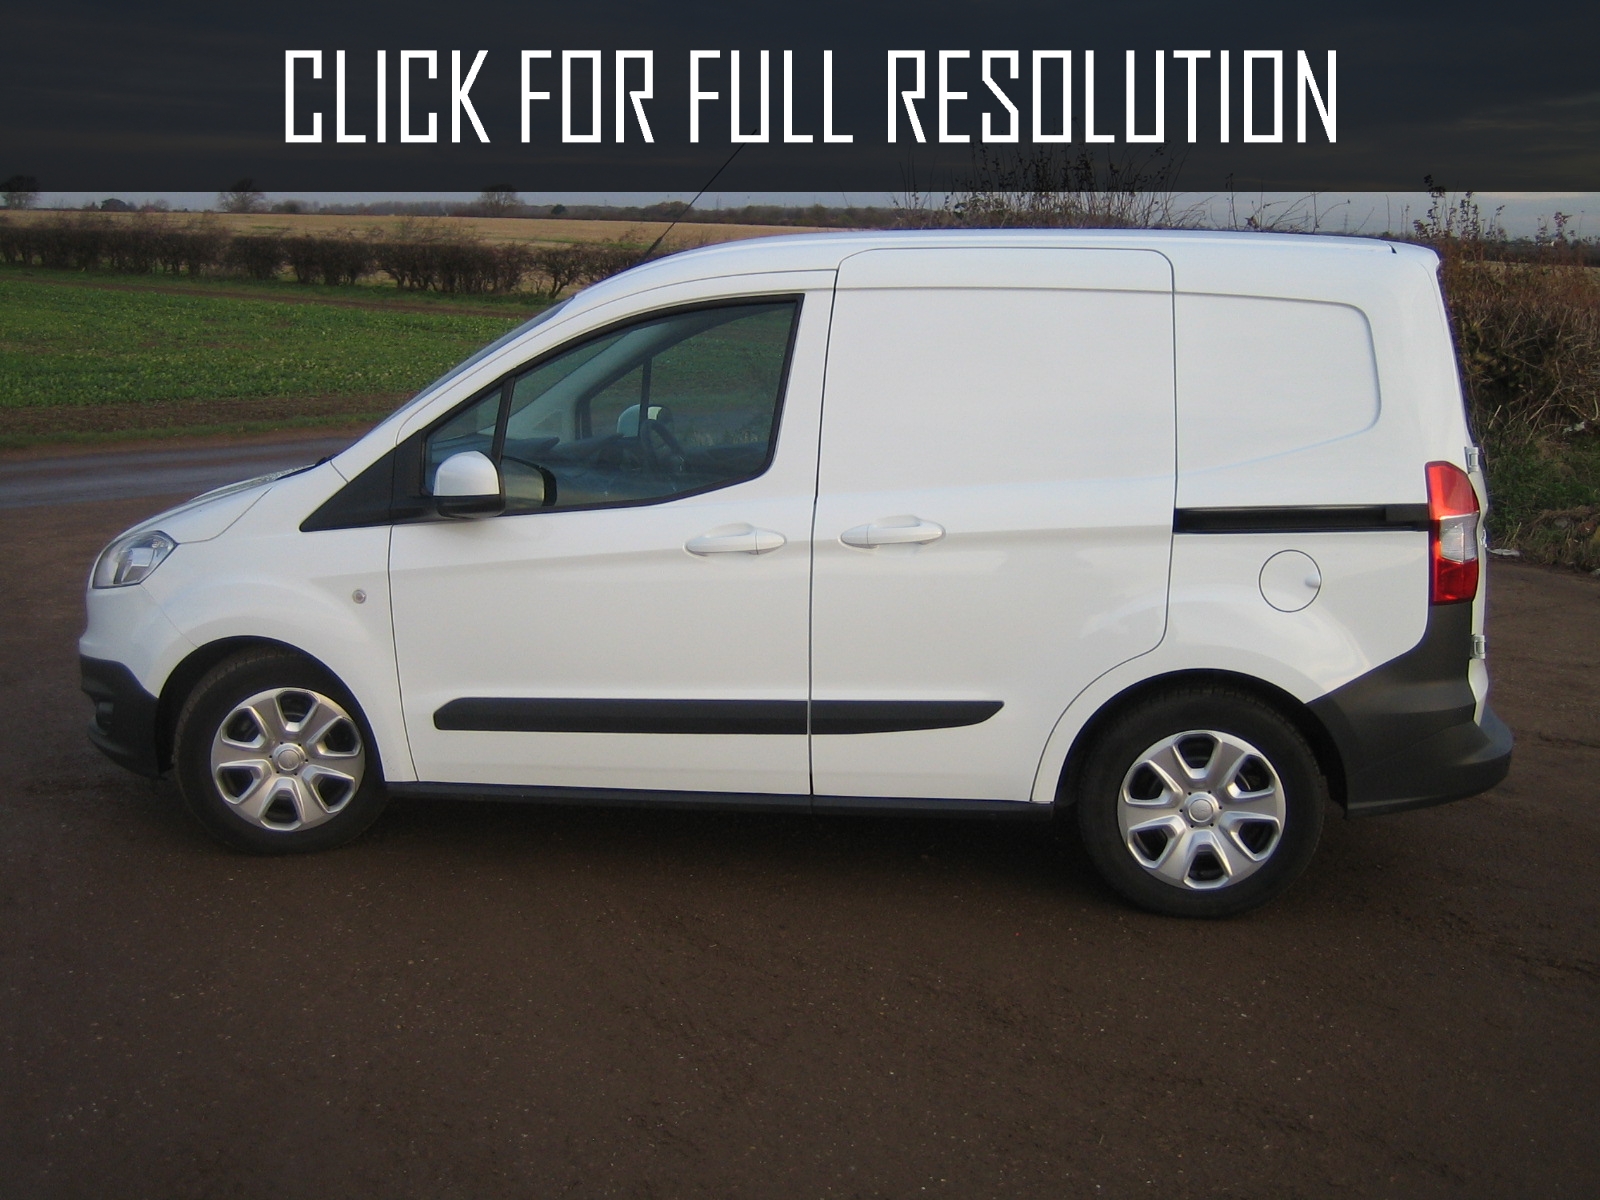 Ford Courier Transit